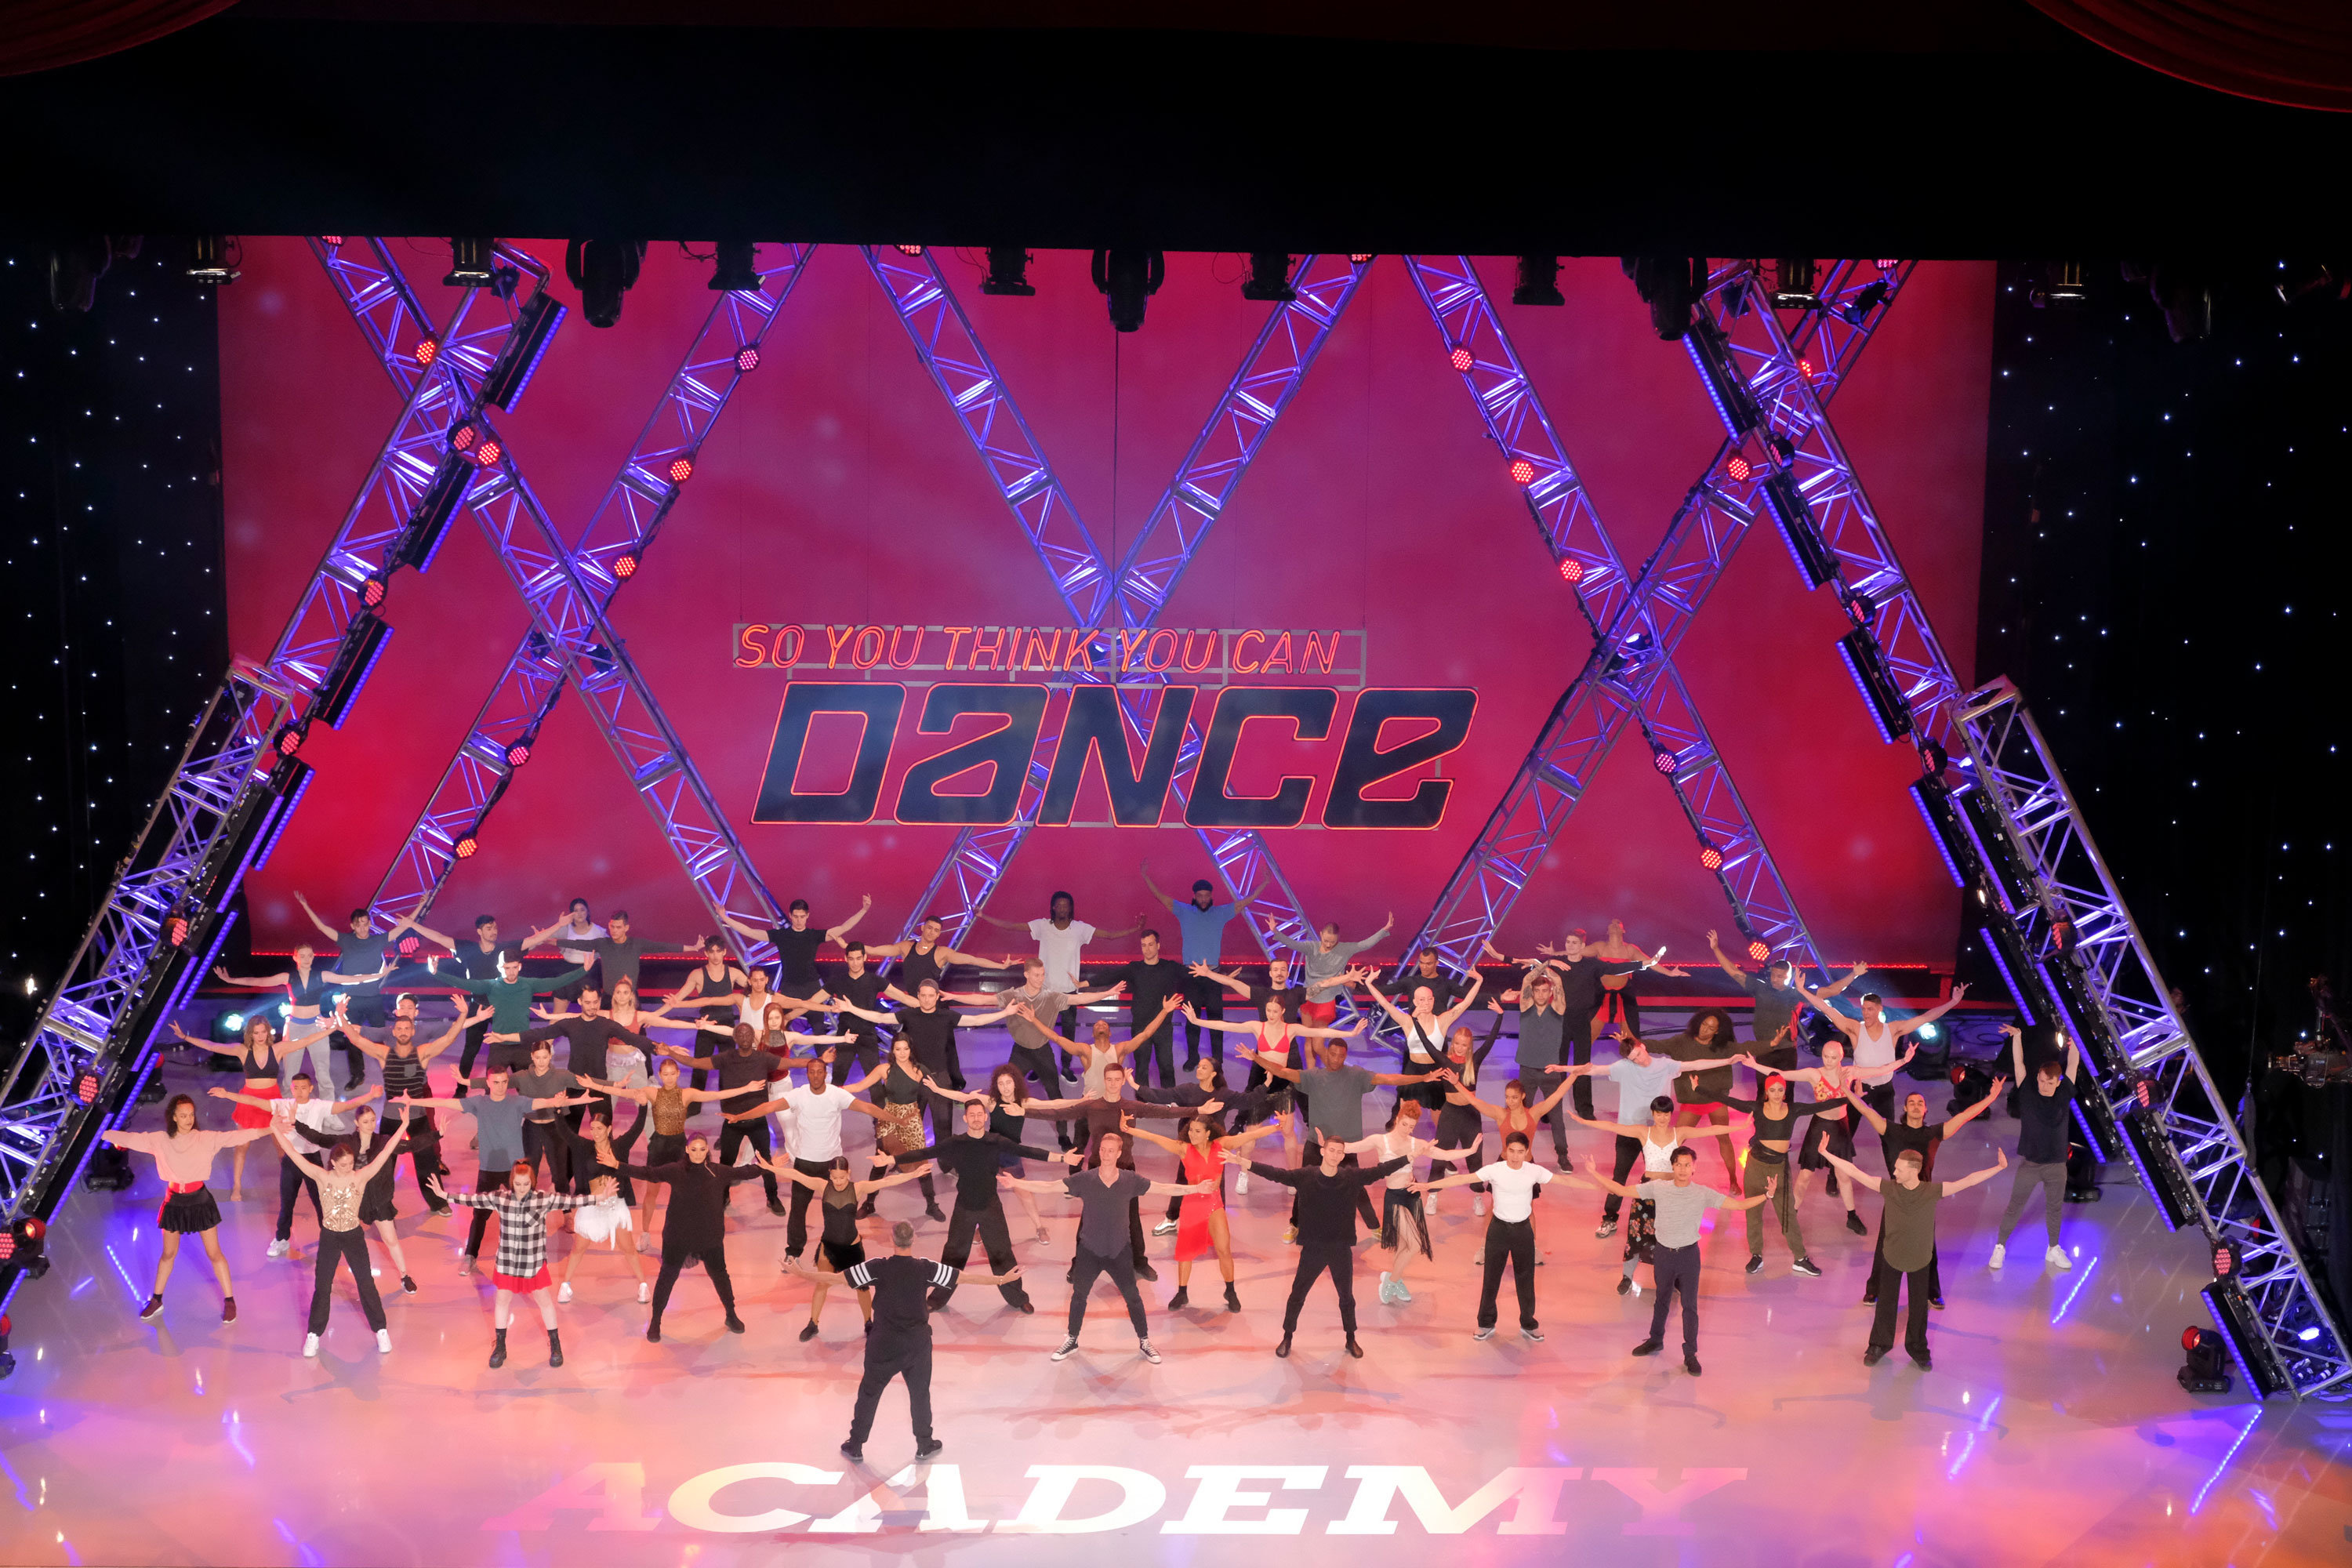 9 Dancers We Want to See on "SYTYCD" Season 17 LaptrinhX / News